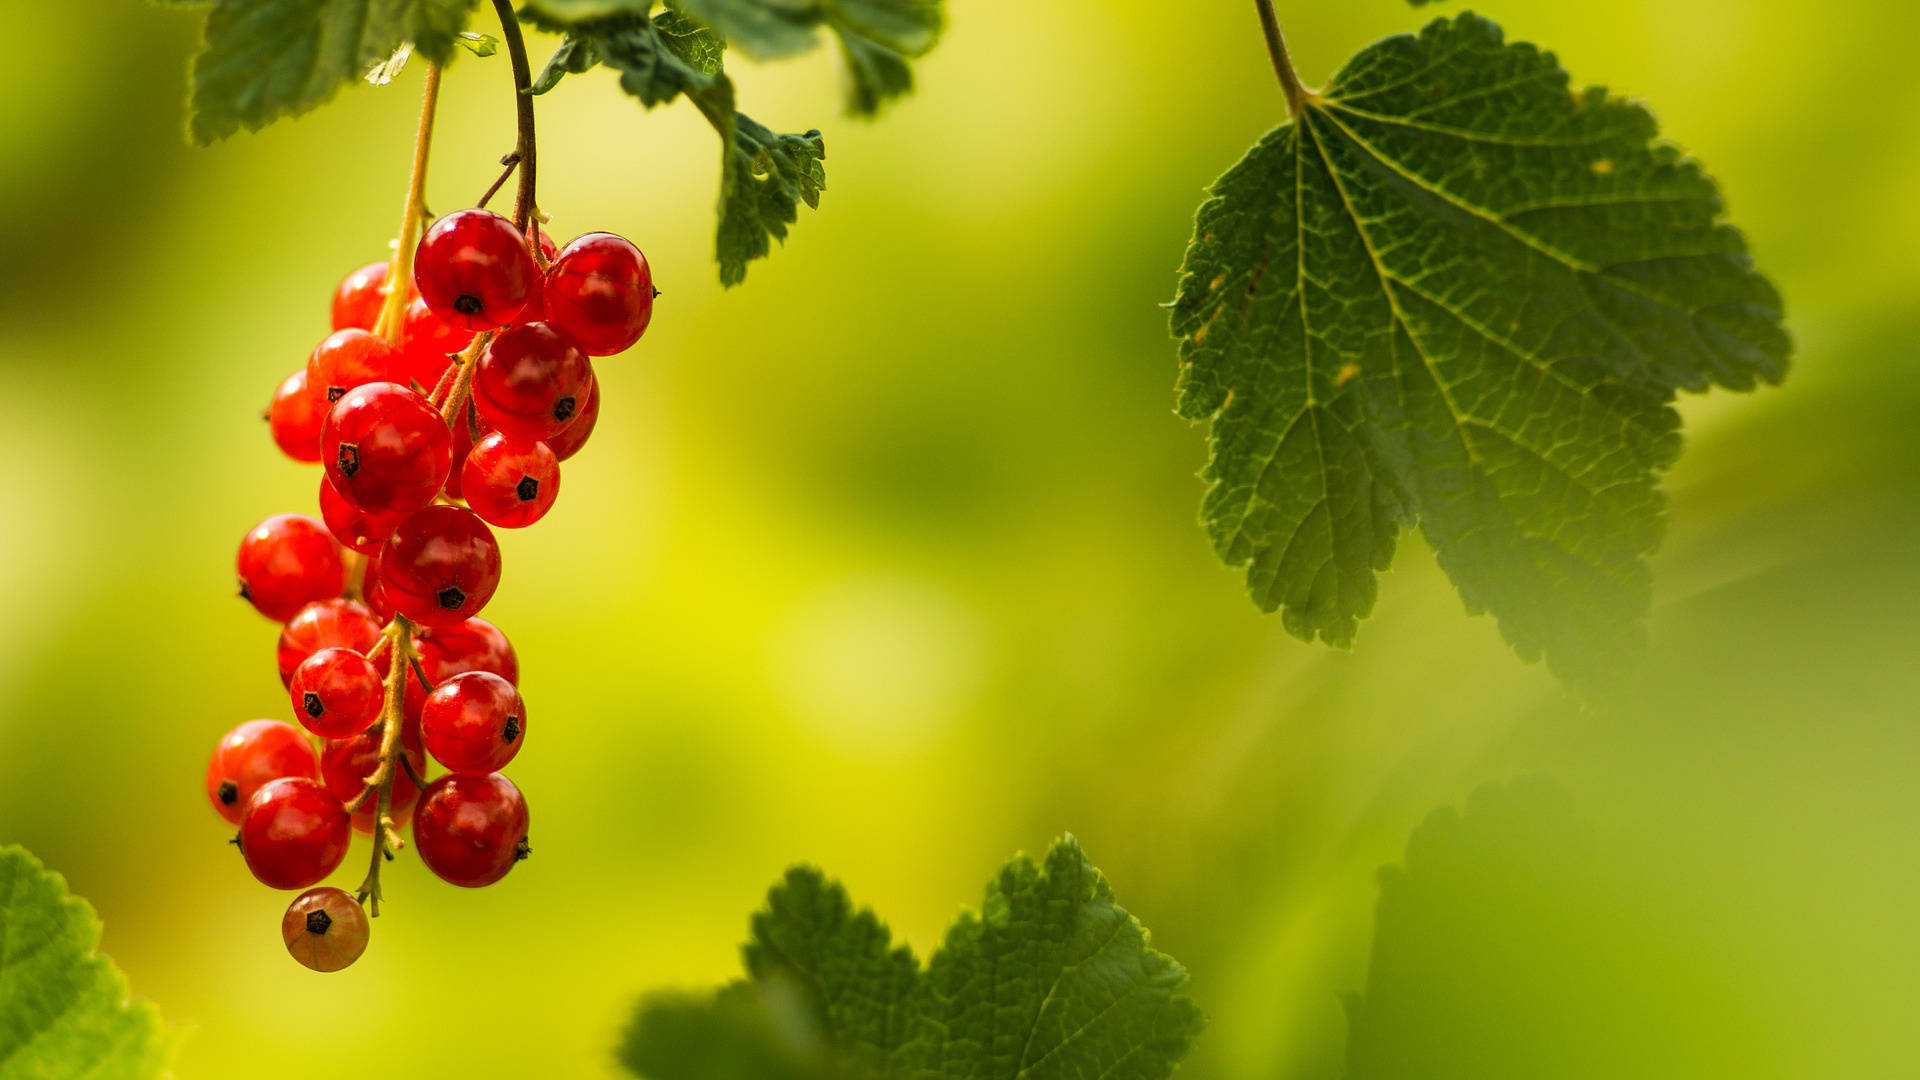 Succulent Red Currants Hanging on Branch Wallpaper